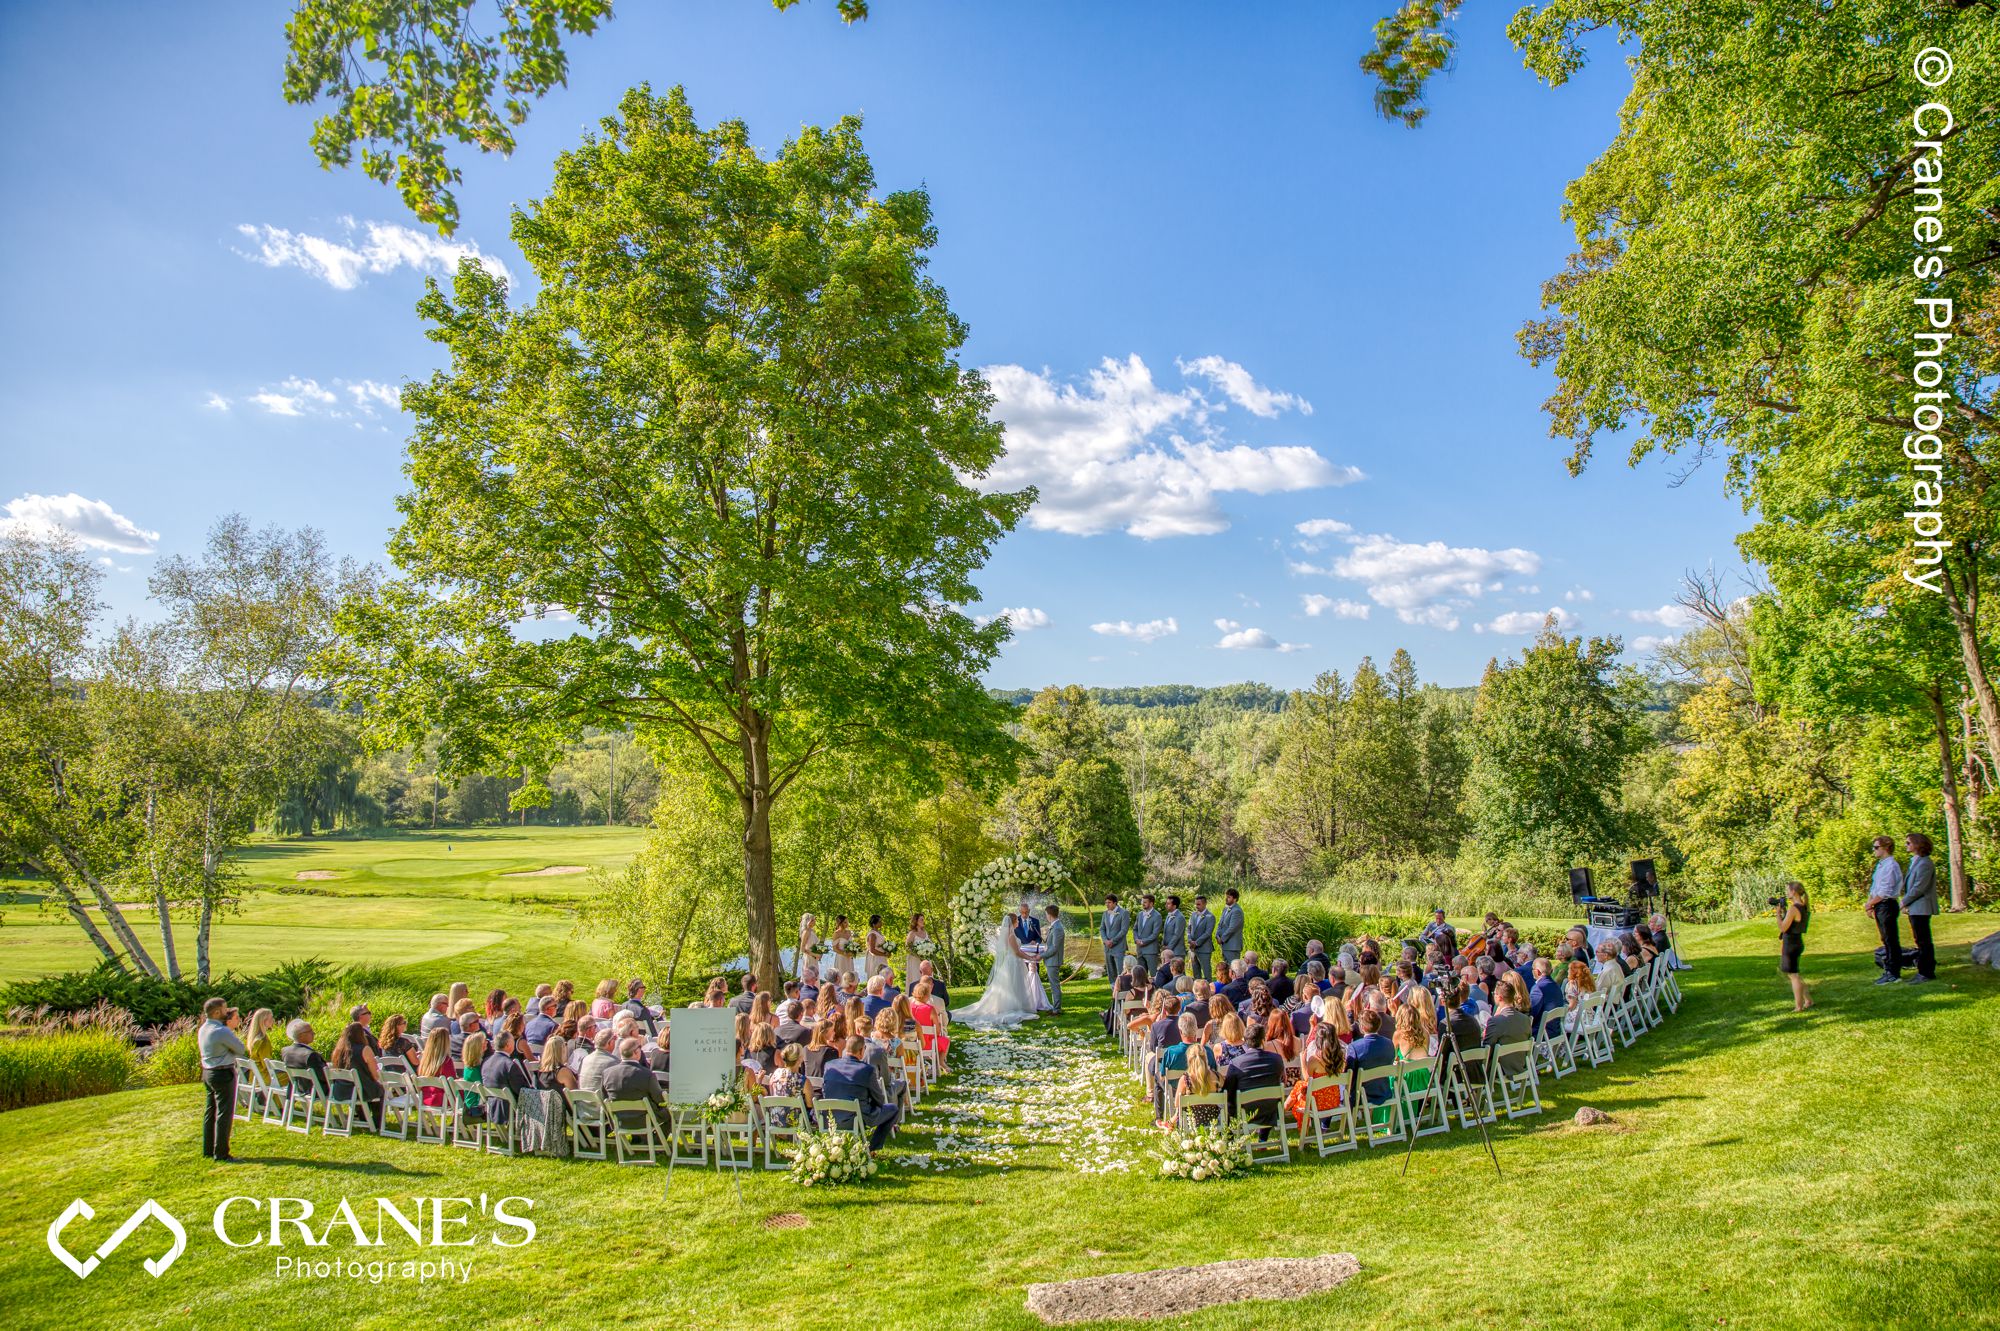 An outdoor wedding ceremony at Big Foot Country Club in Fontana-On-Geneva Lake